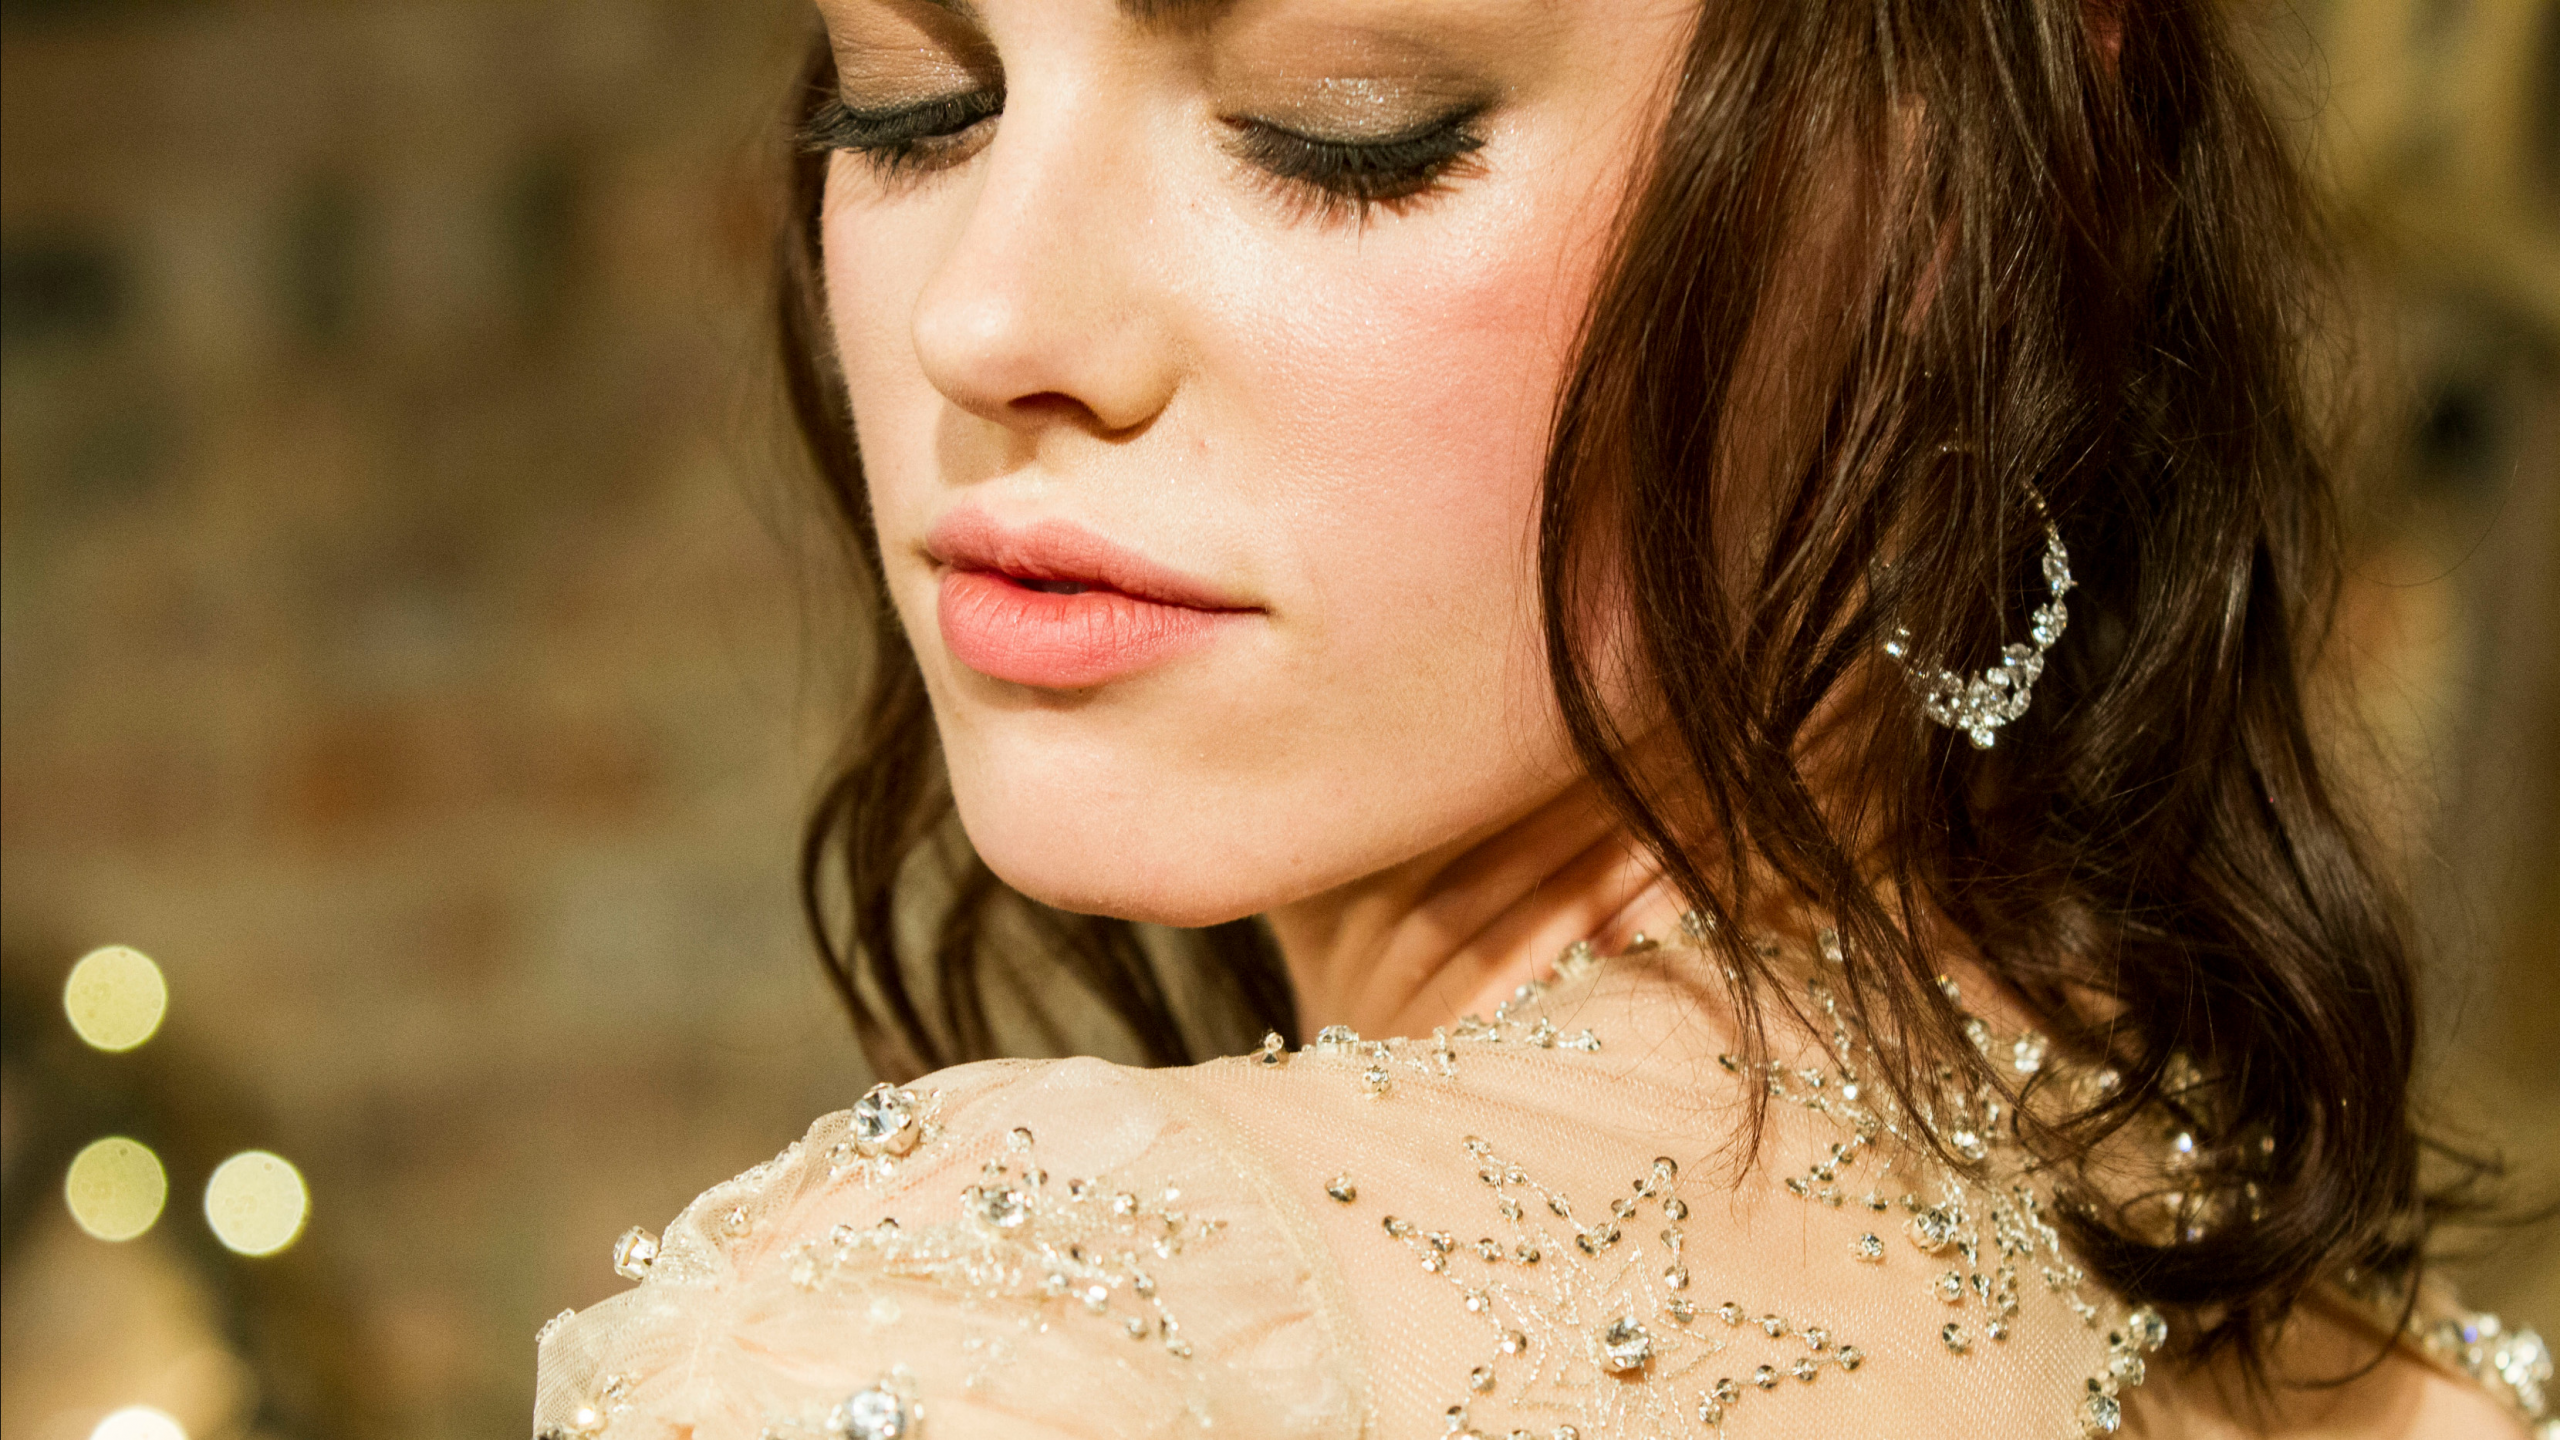 Makeup Artist Wedding
 The Best Advice for When You Book Your Wedding Makeup